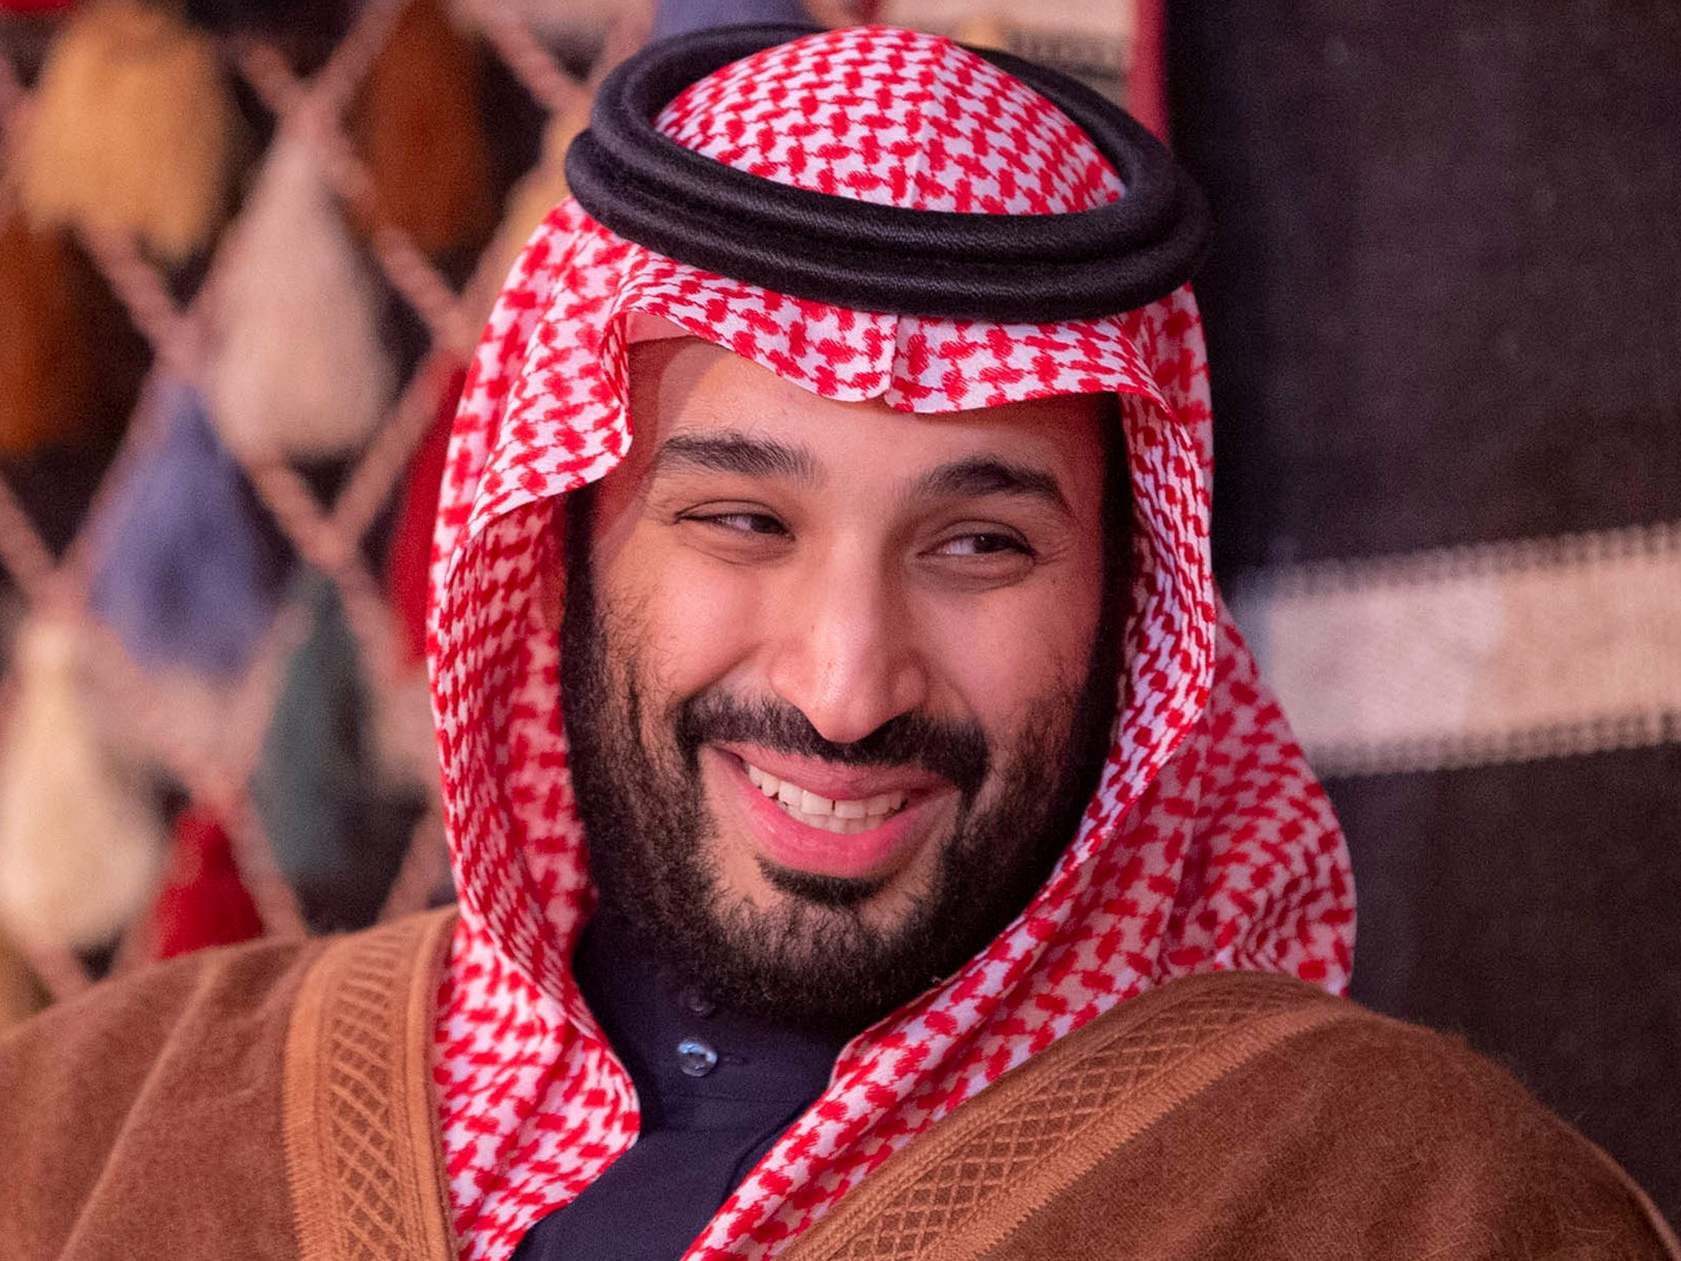 Crown Prince Mohammed bin Salman told 'Time' magazine in 2018 that he was looking into ways to reduce executions